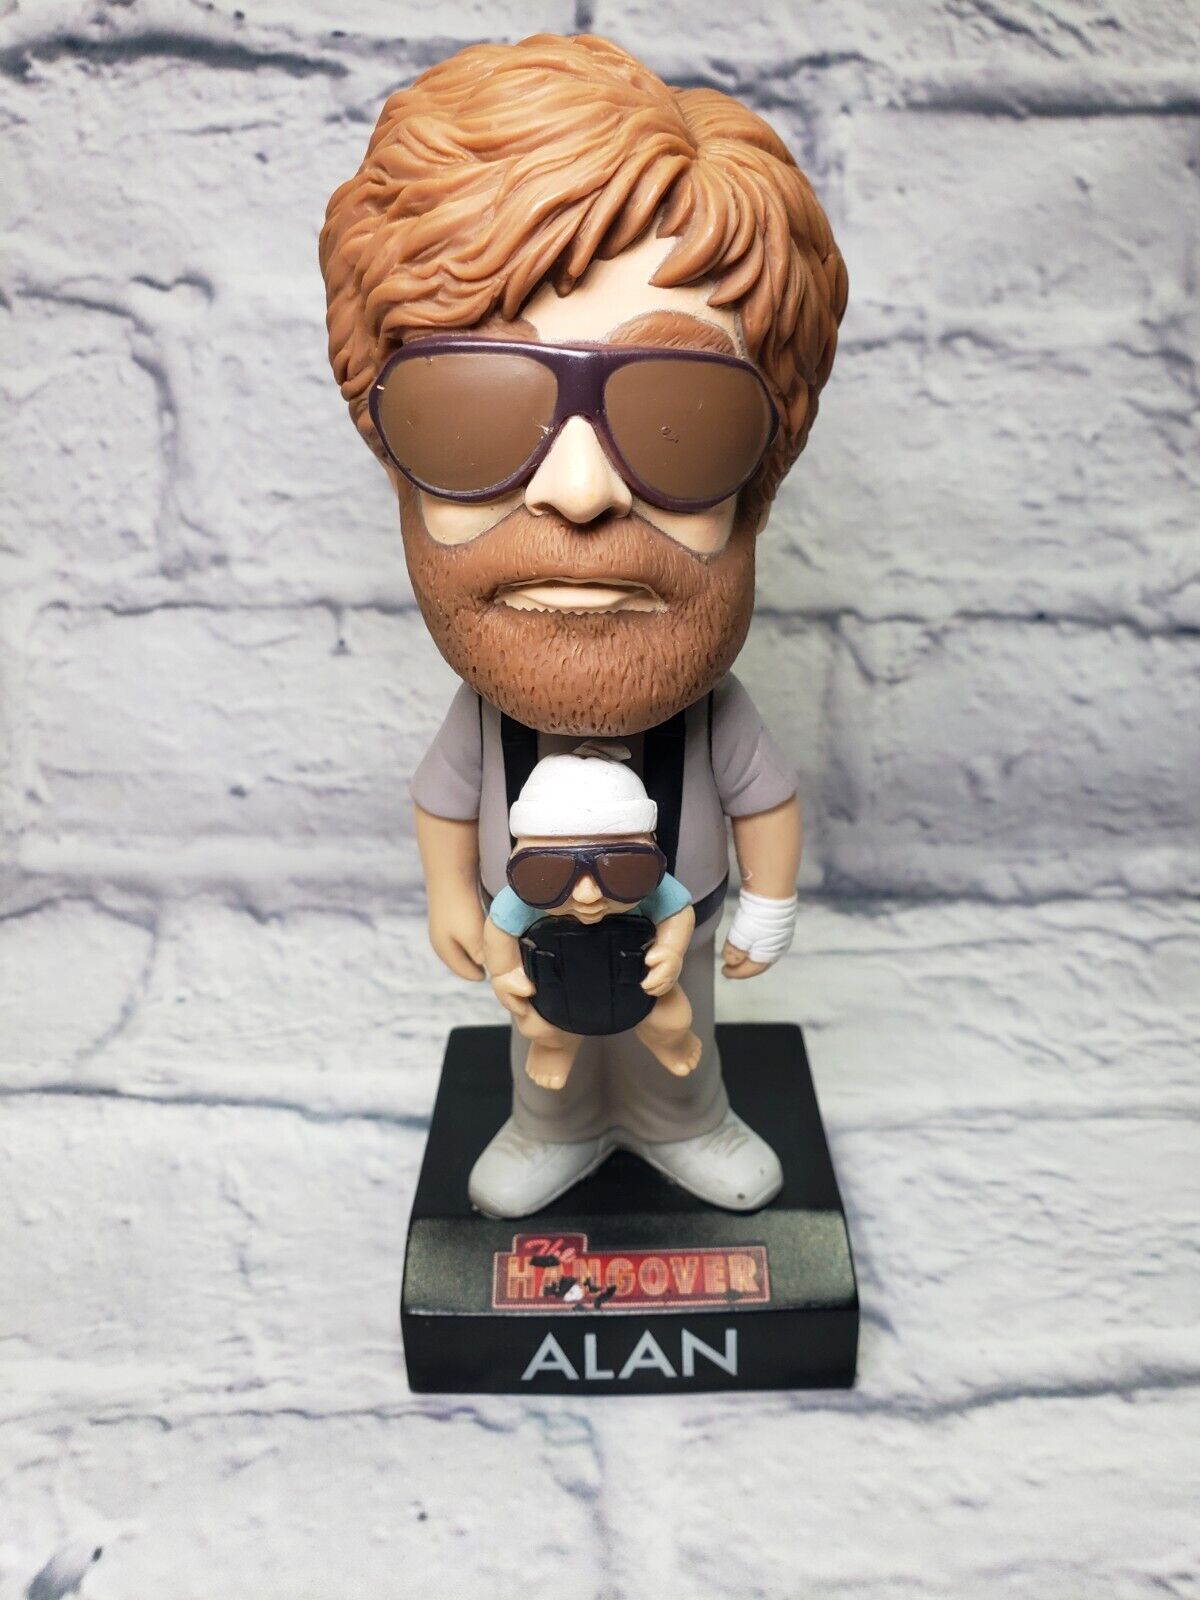 Alan The Hangover Funko Bobblehead with baby Carlos